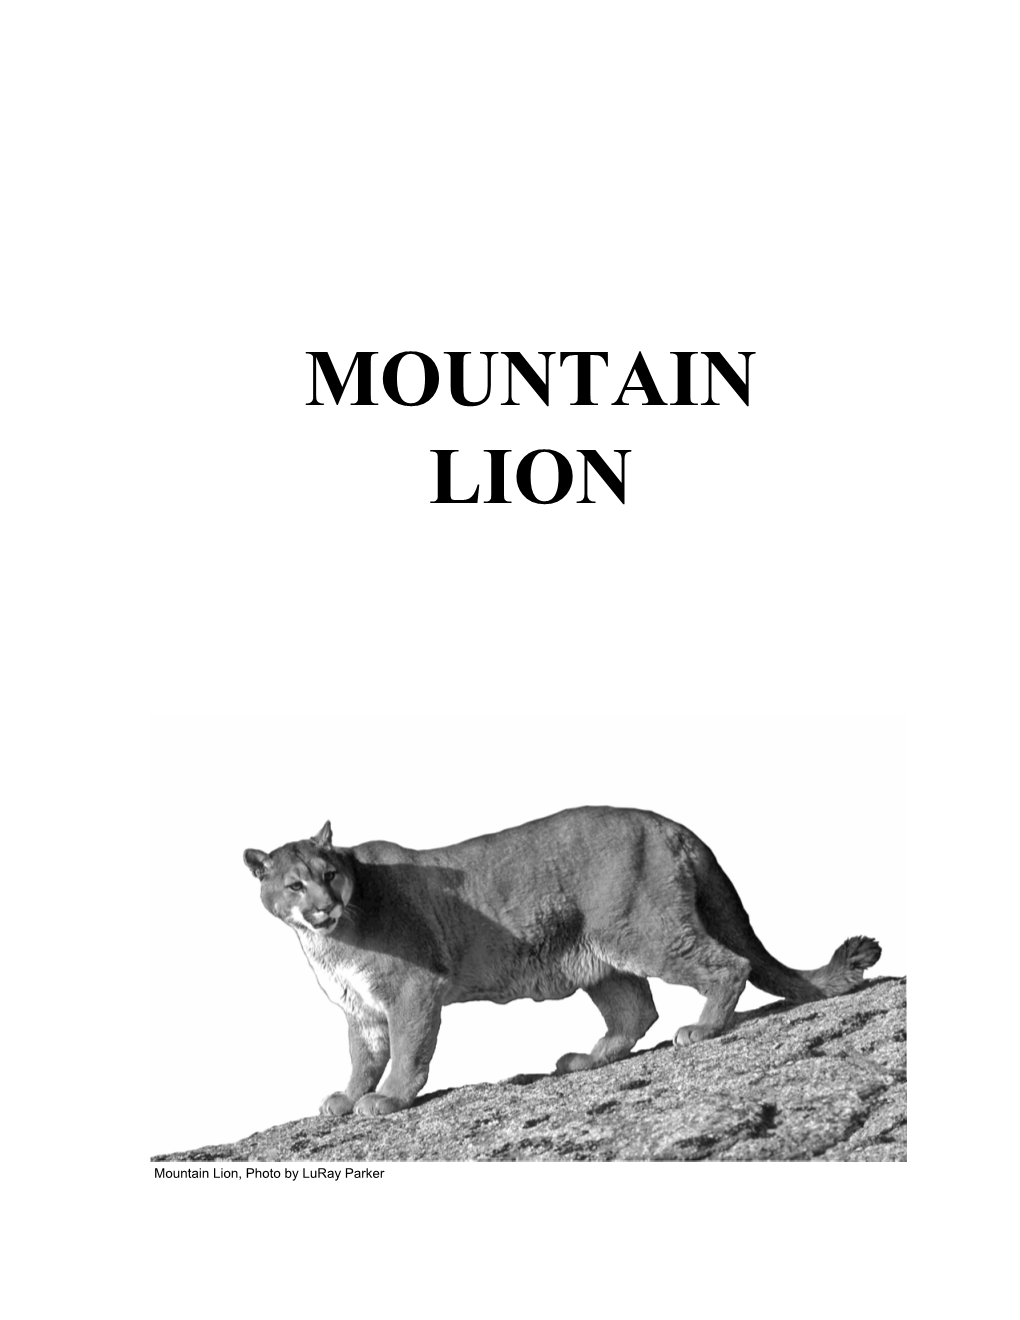 Wyoming 2008-09 Mountain Lion Hunting Harvest Report